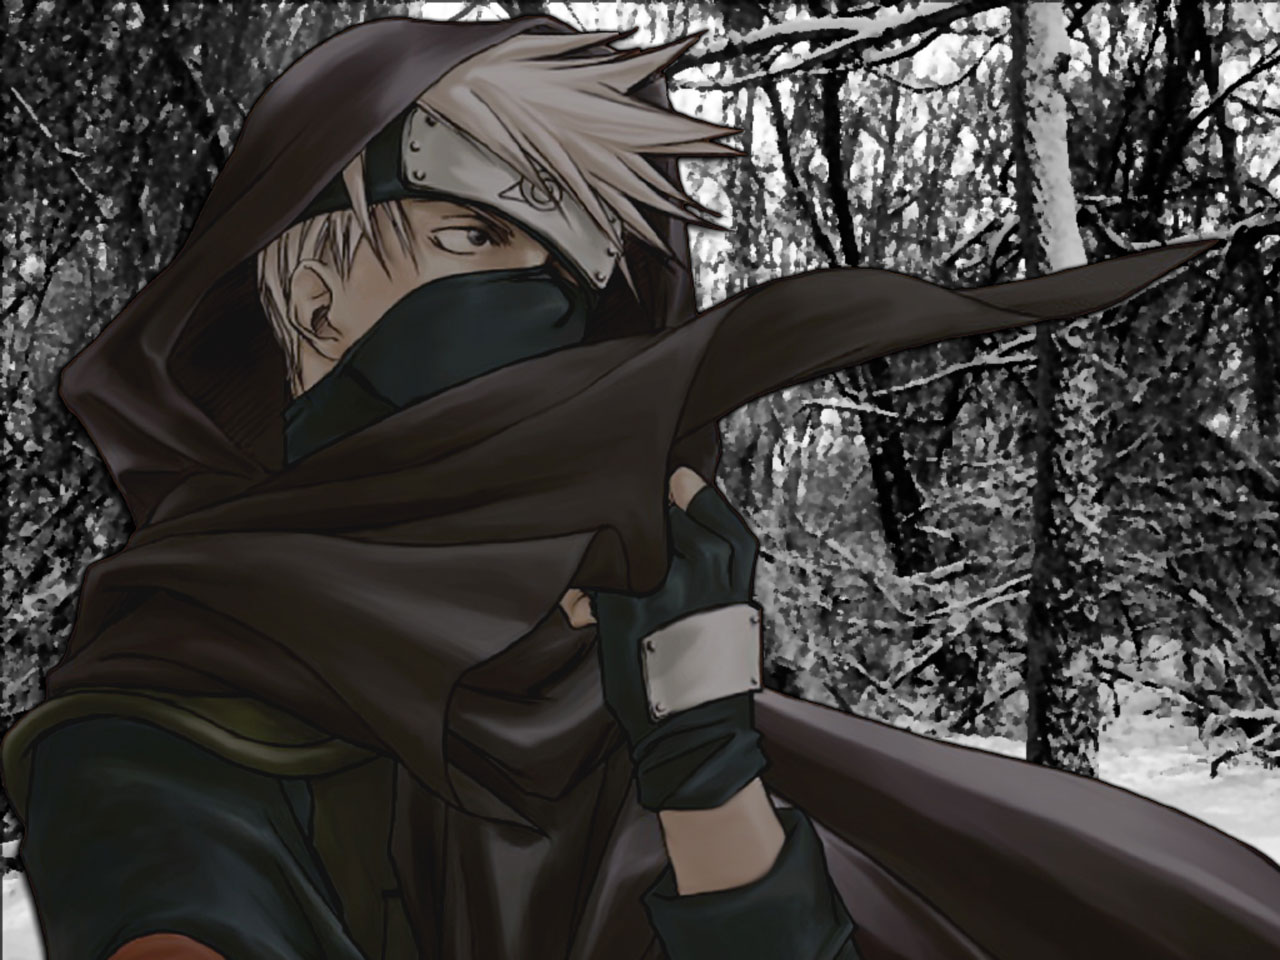 Wallpapers Pictures Photos: Favorite Kakashi Pictures